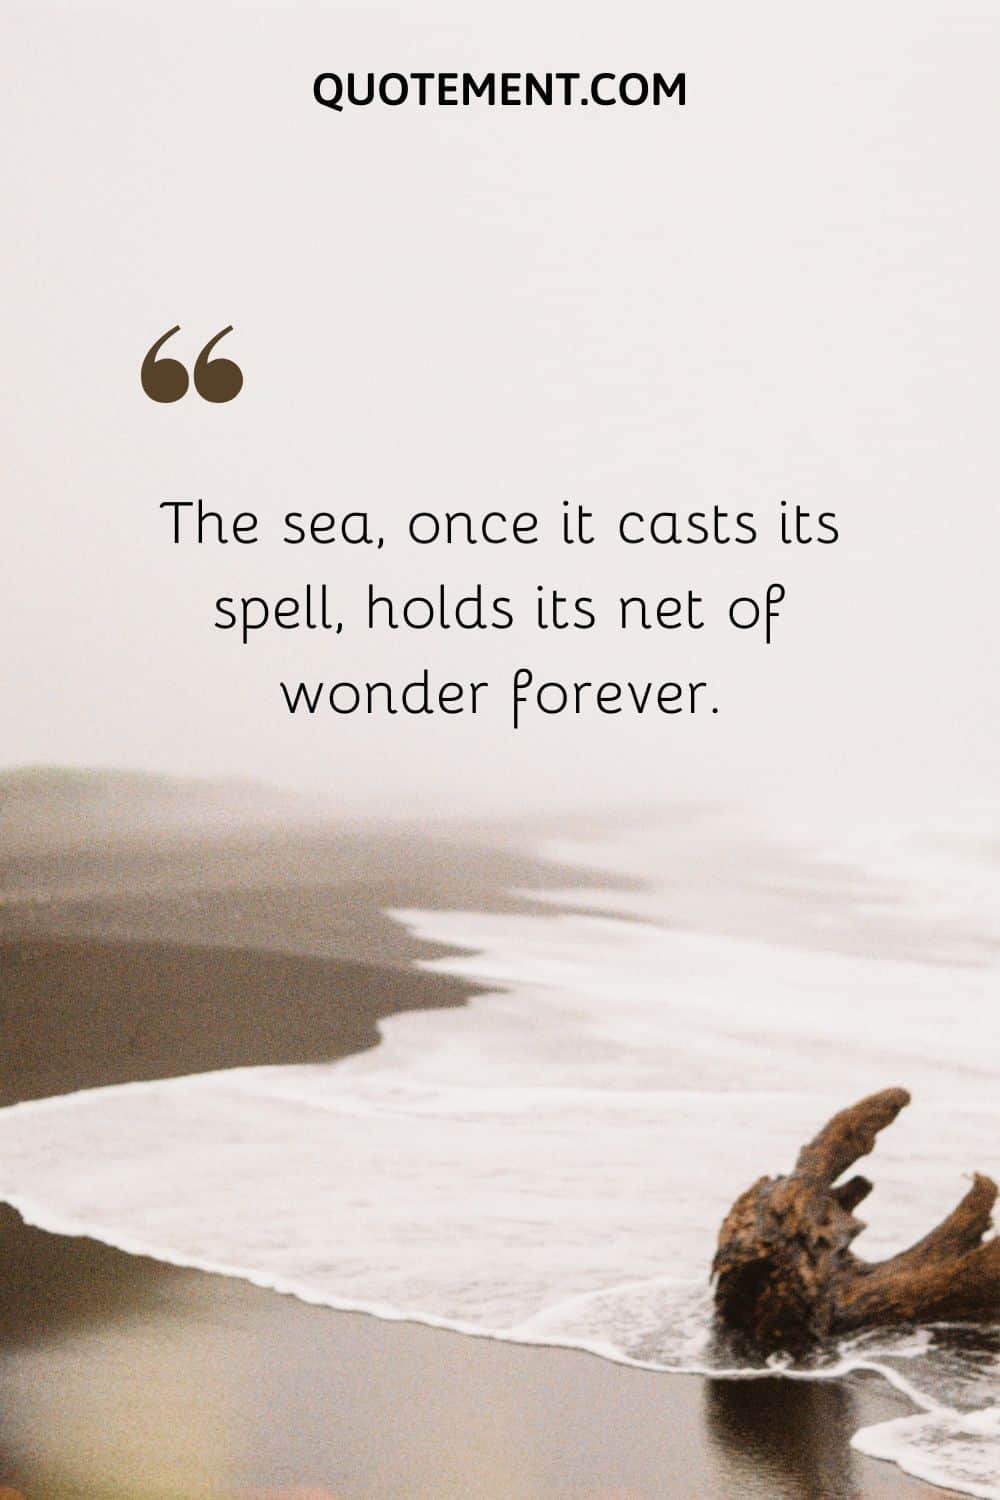 The sea, once it casts its spell, holds its net of wonder forever.